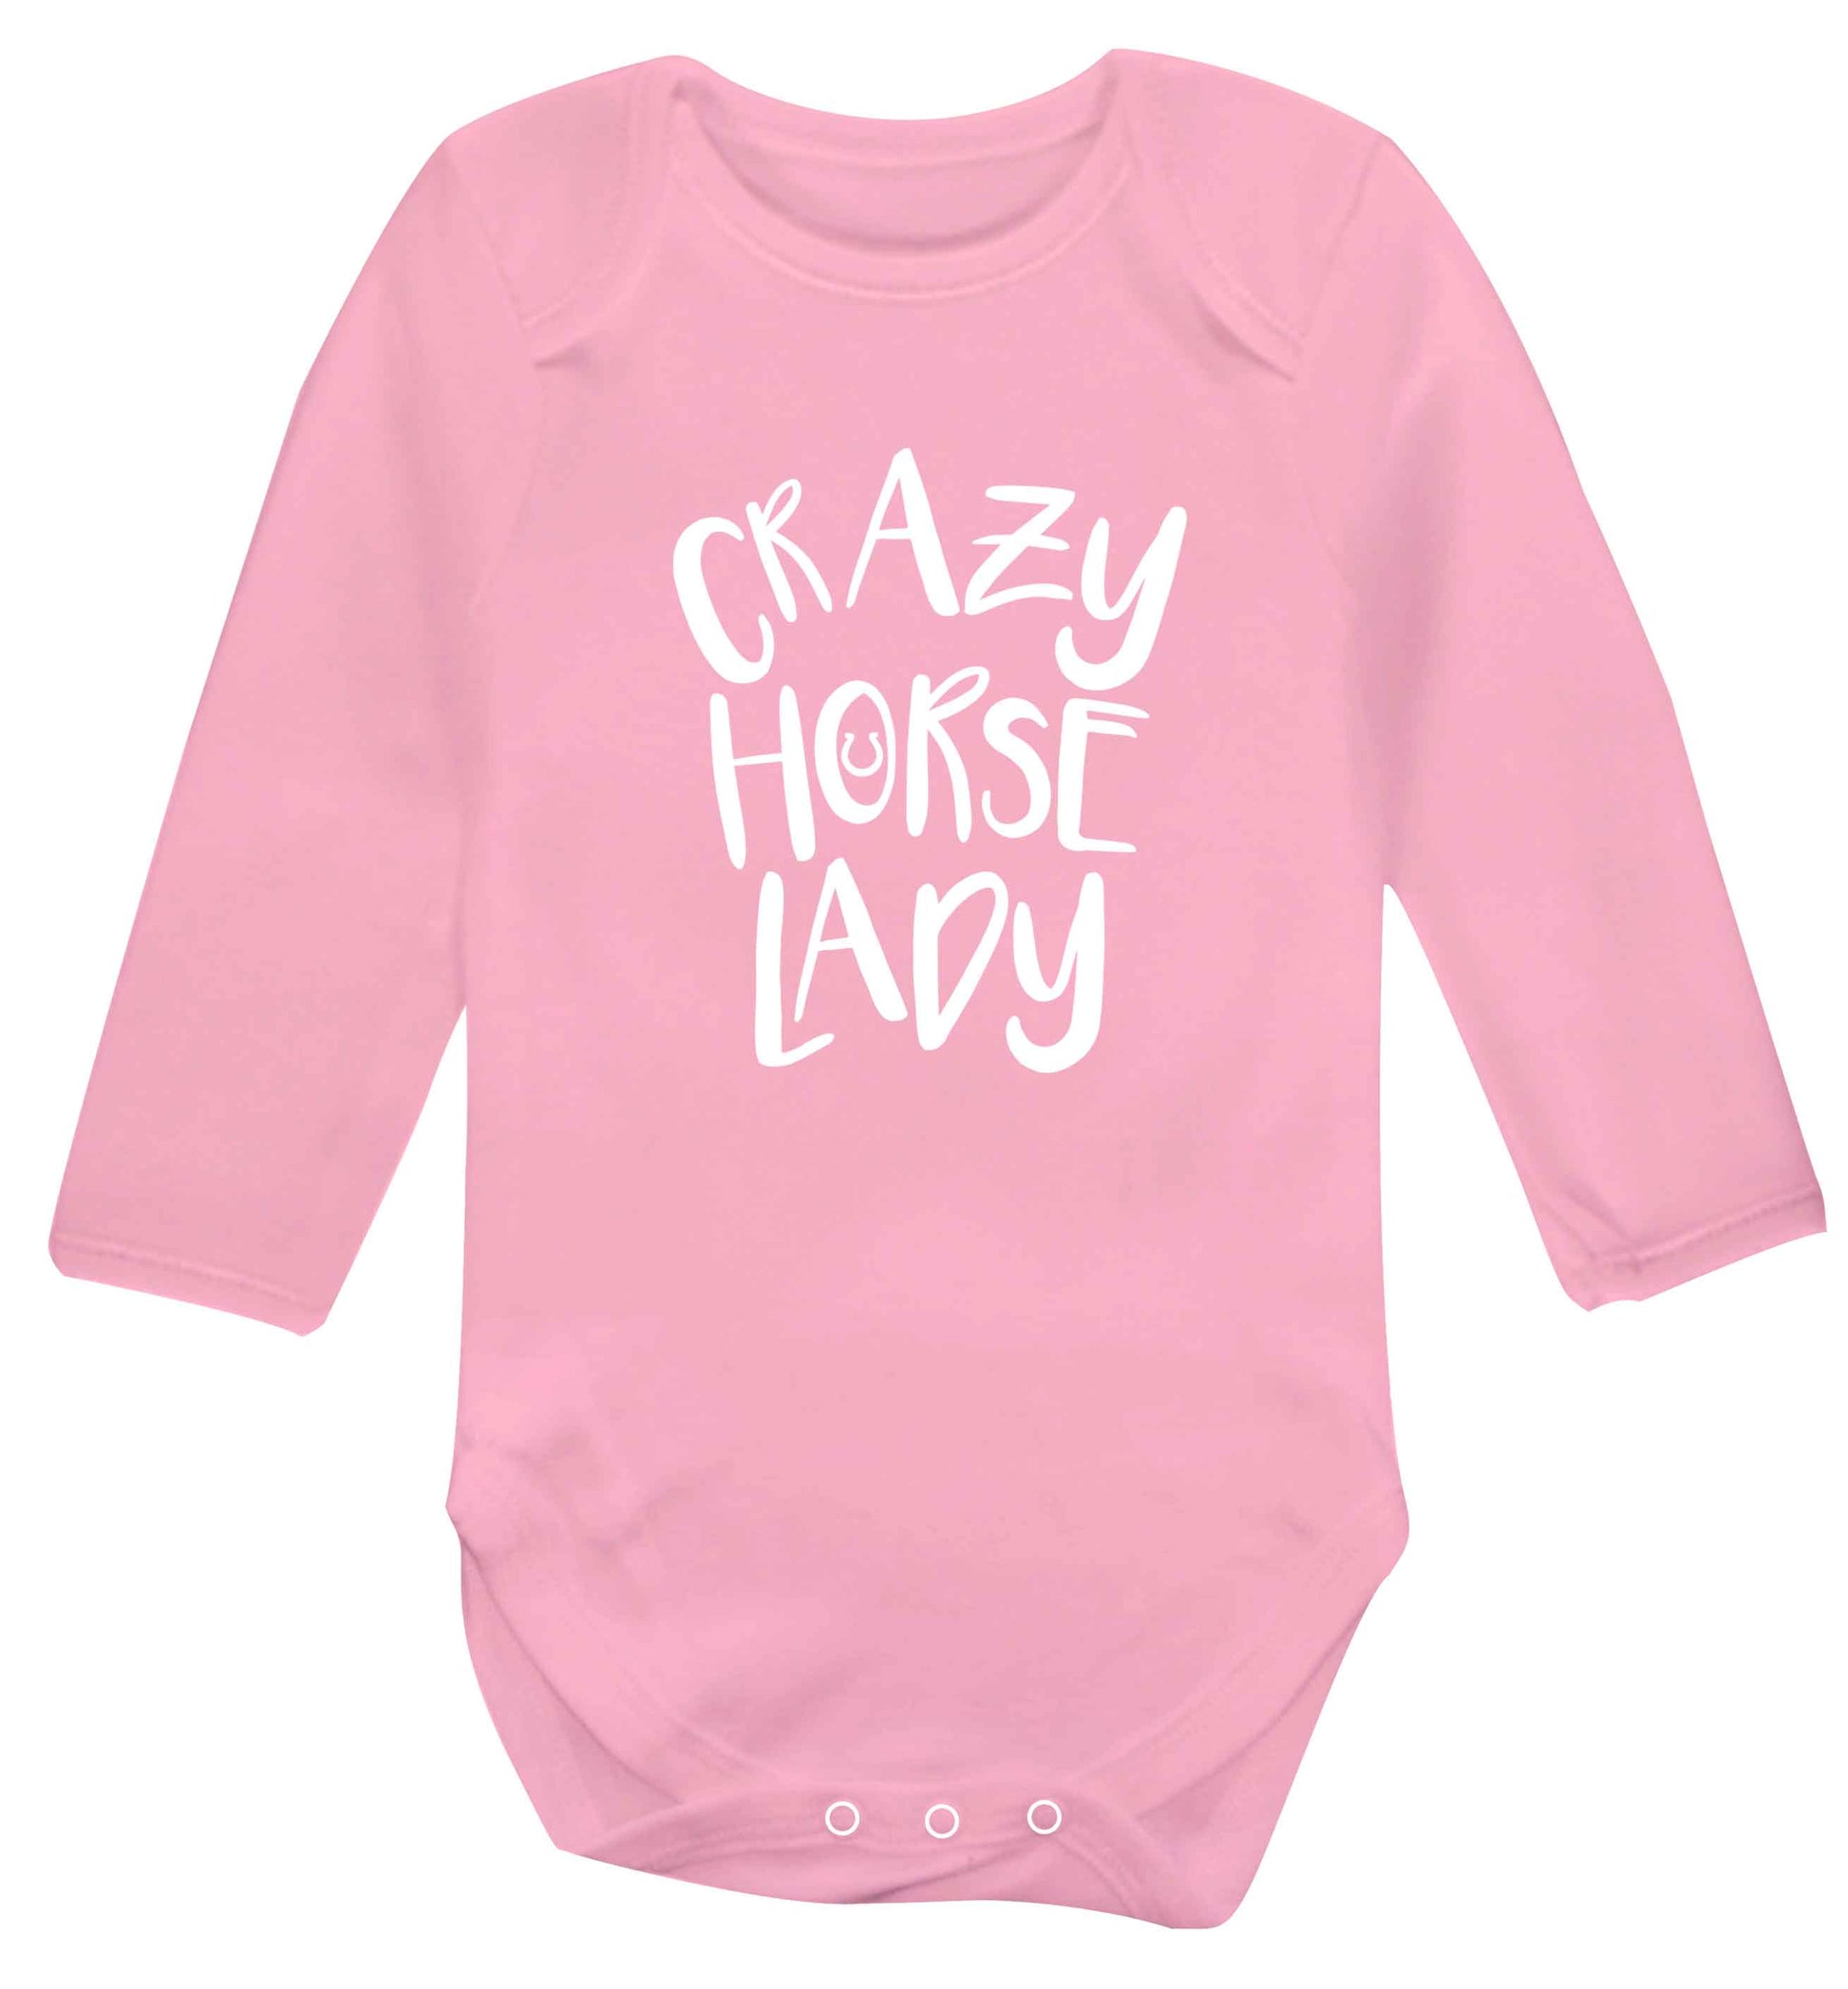 Crazy horse lady baby vest long sleeved pale pink 6-12 months